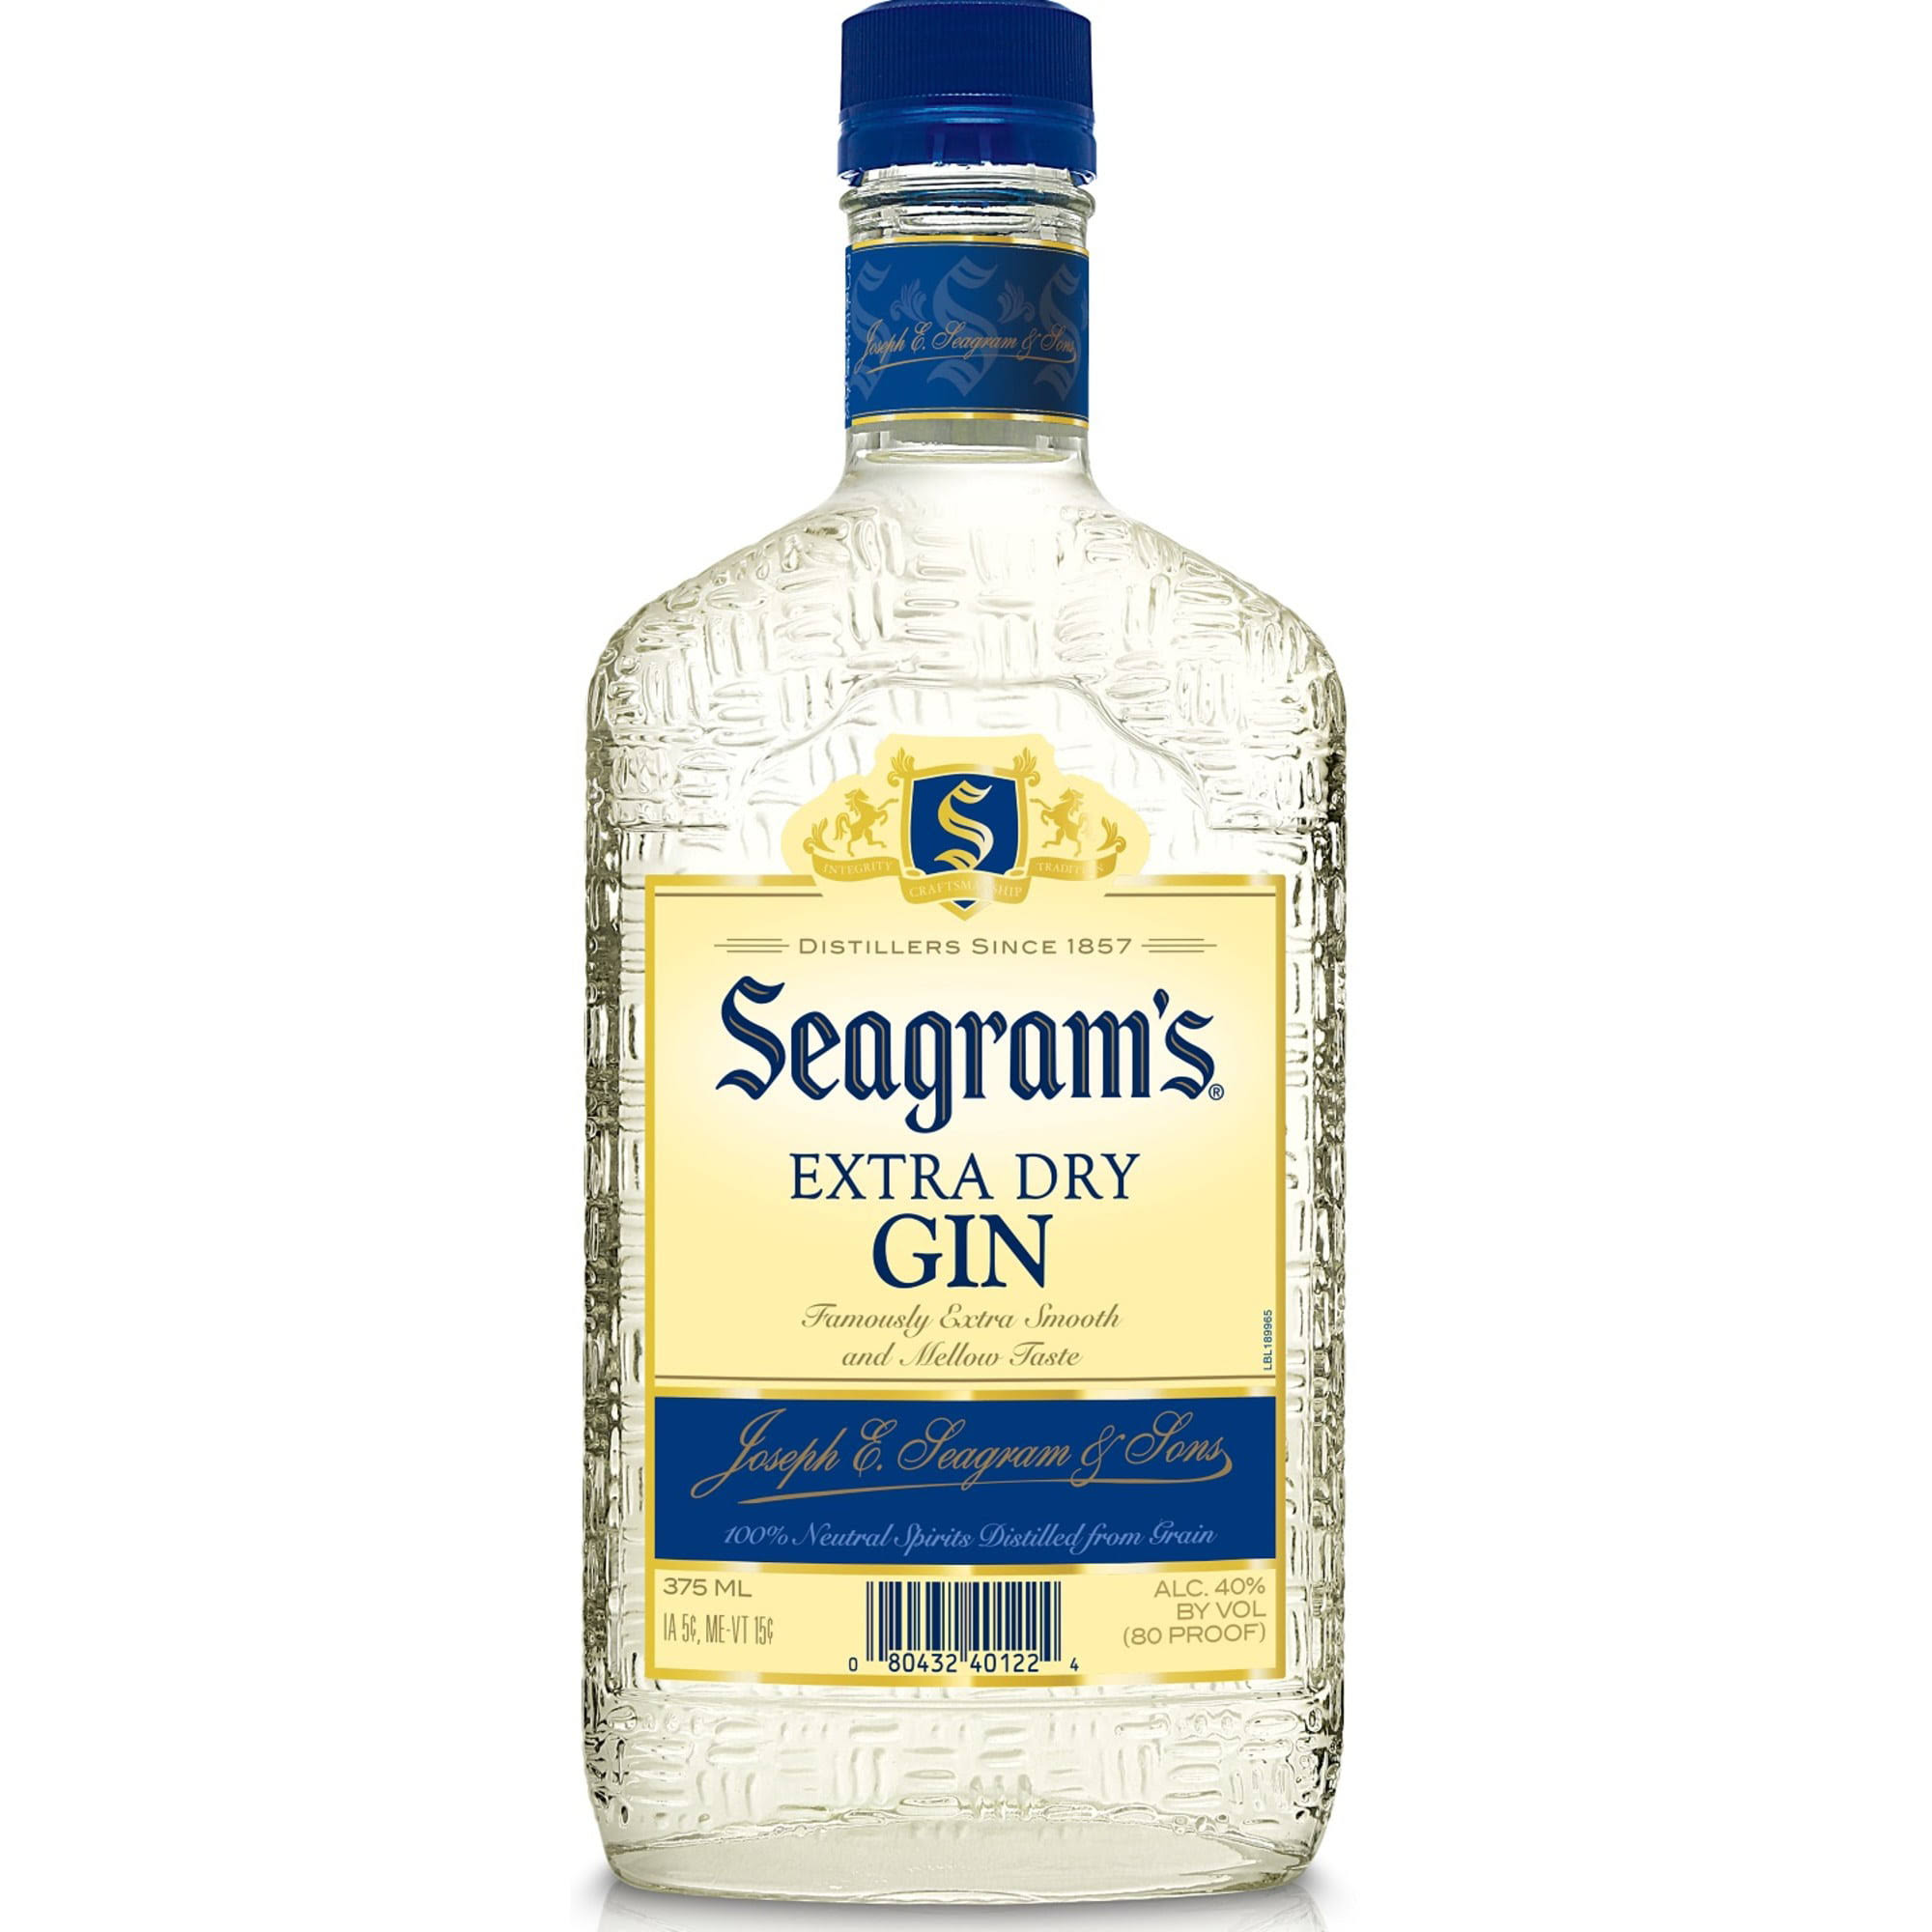 Seagram's Gin, Extra Dry - 375 ml